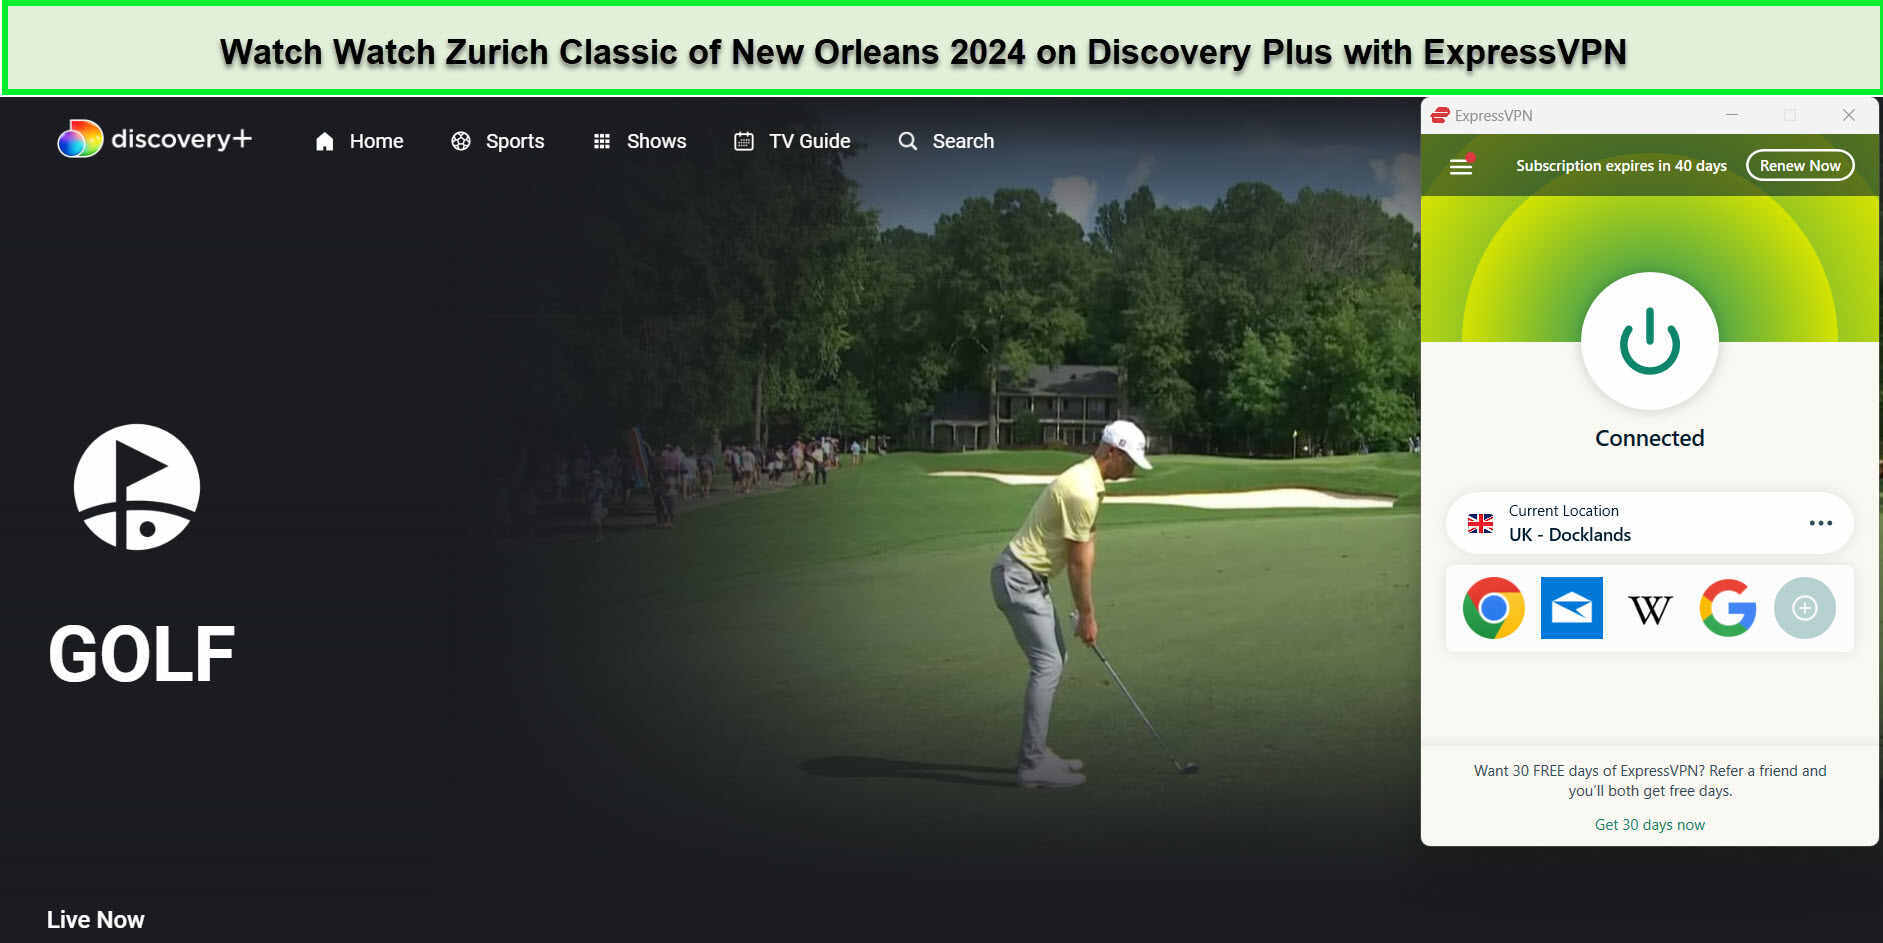 Watch-Zurich-Classic-of-New-Orleans-2024-in-Italy-On-Discovery-Plus-with-ExpressVPN